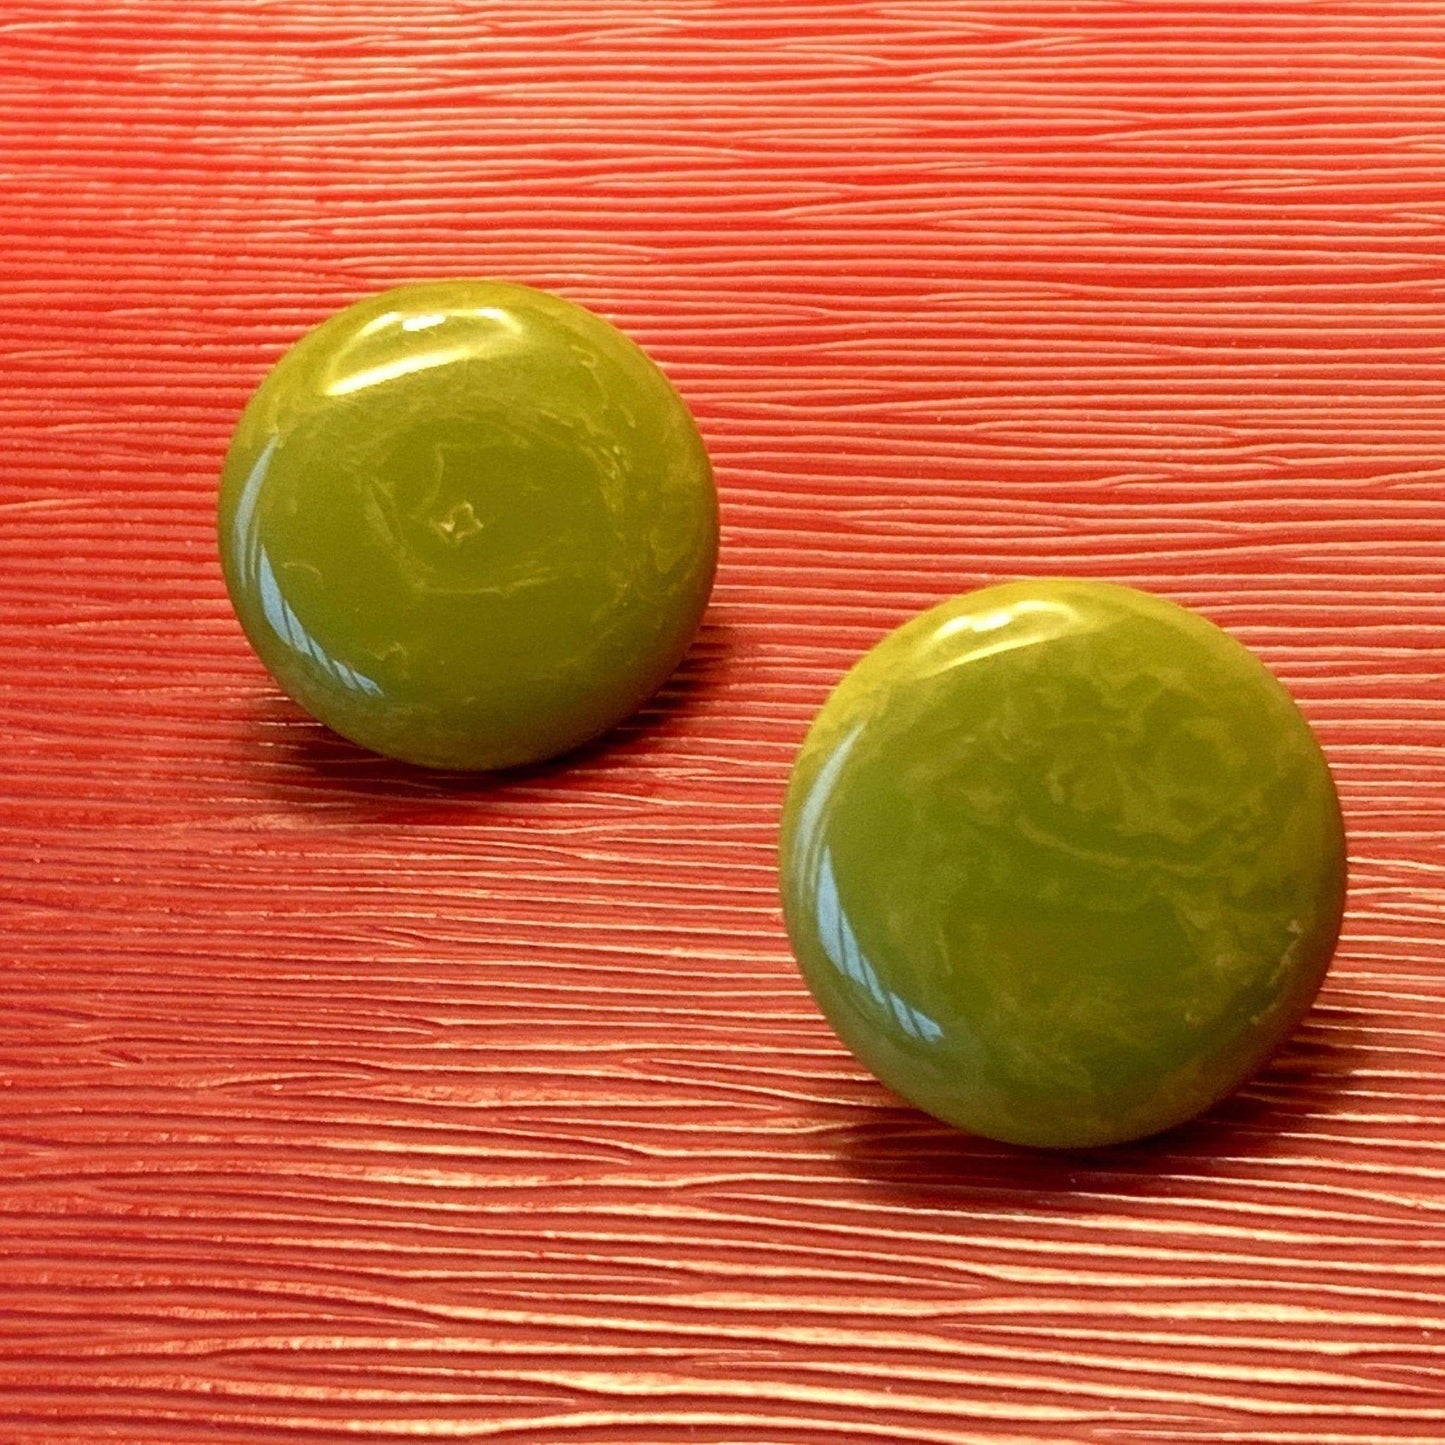 Bakelite Earrings, Vintage Round and Quite Large Green with Swirls